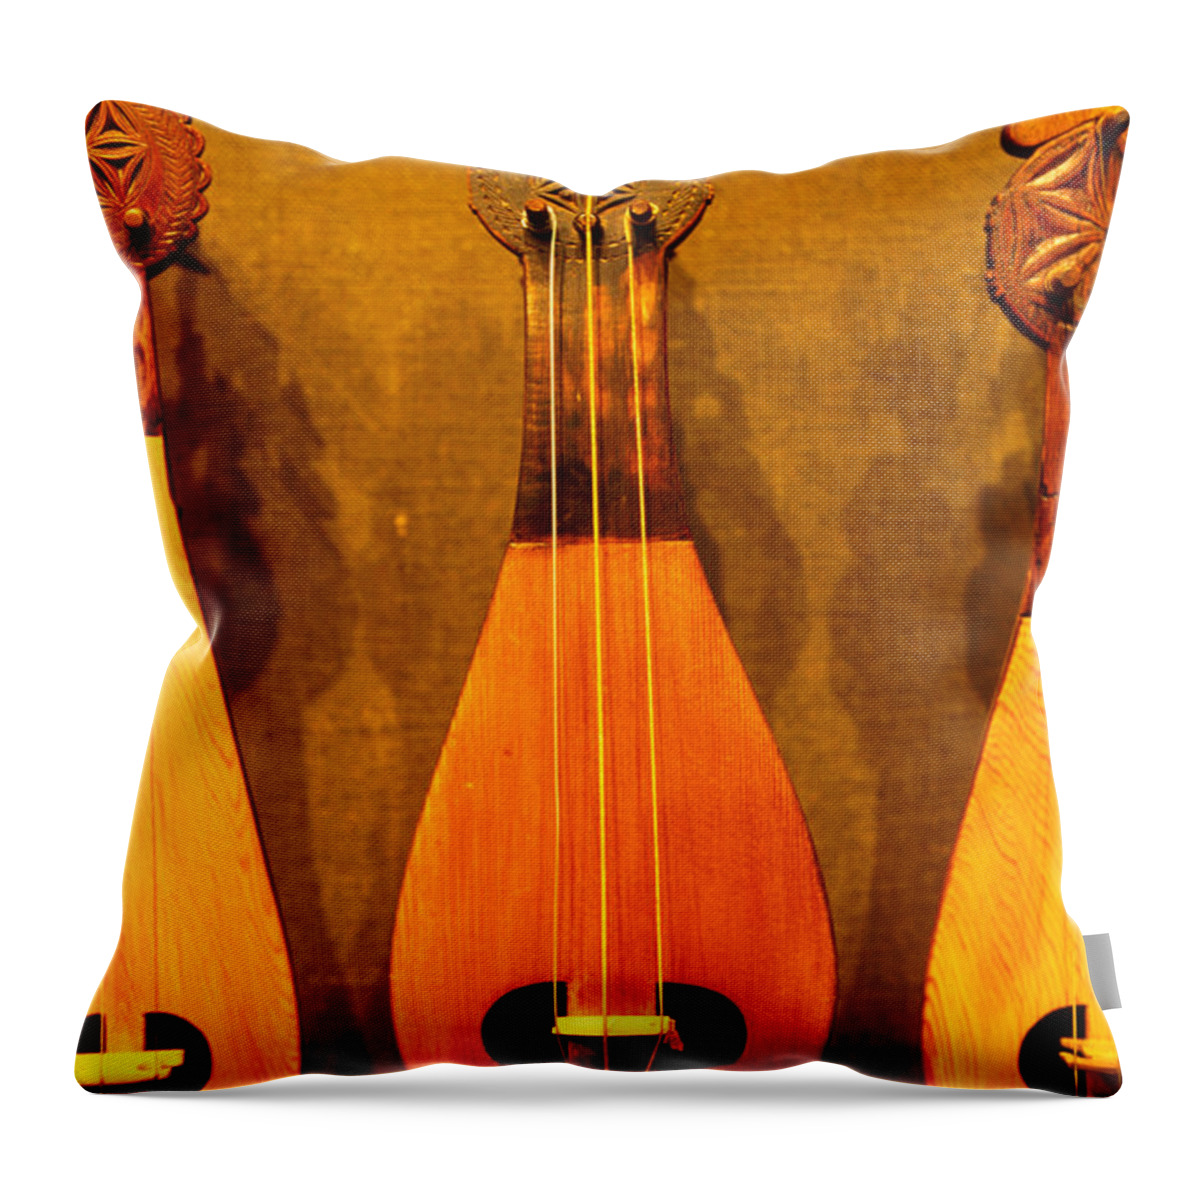 Greece Throw Pillow featuring the photograph Traditional Instruments On Display In by Lonely Planet